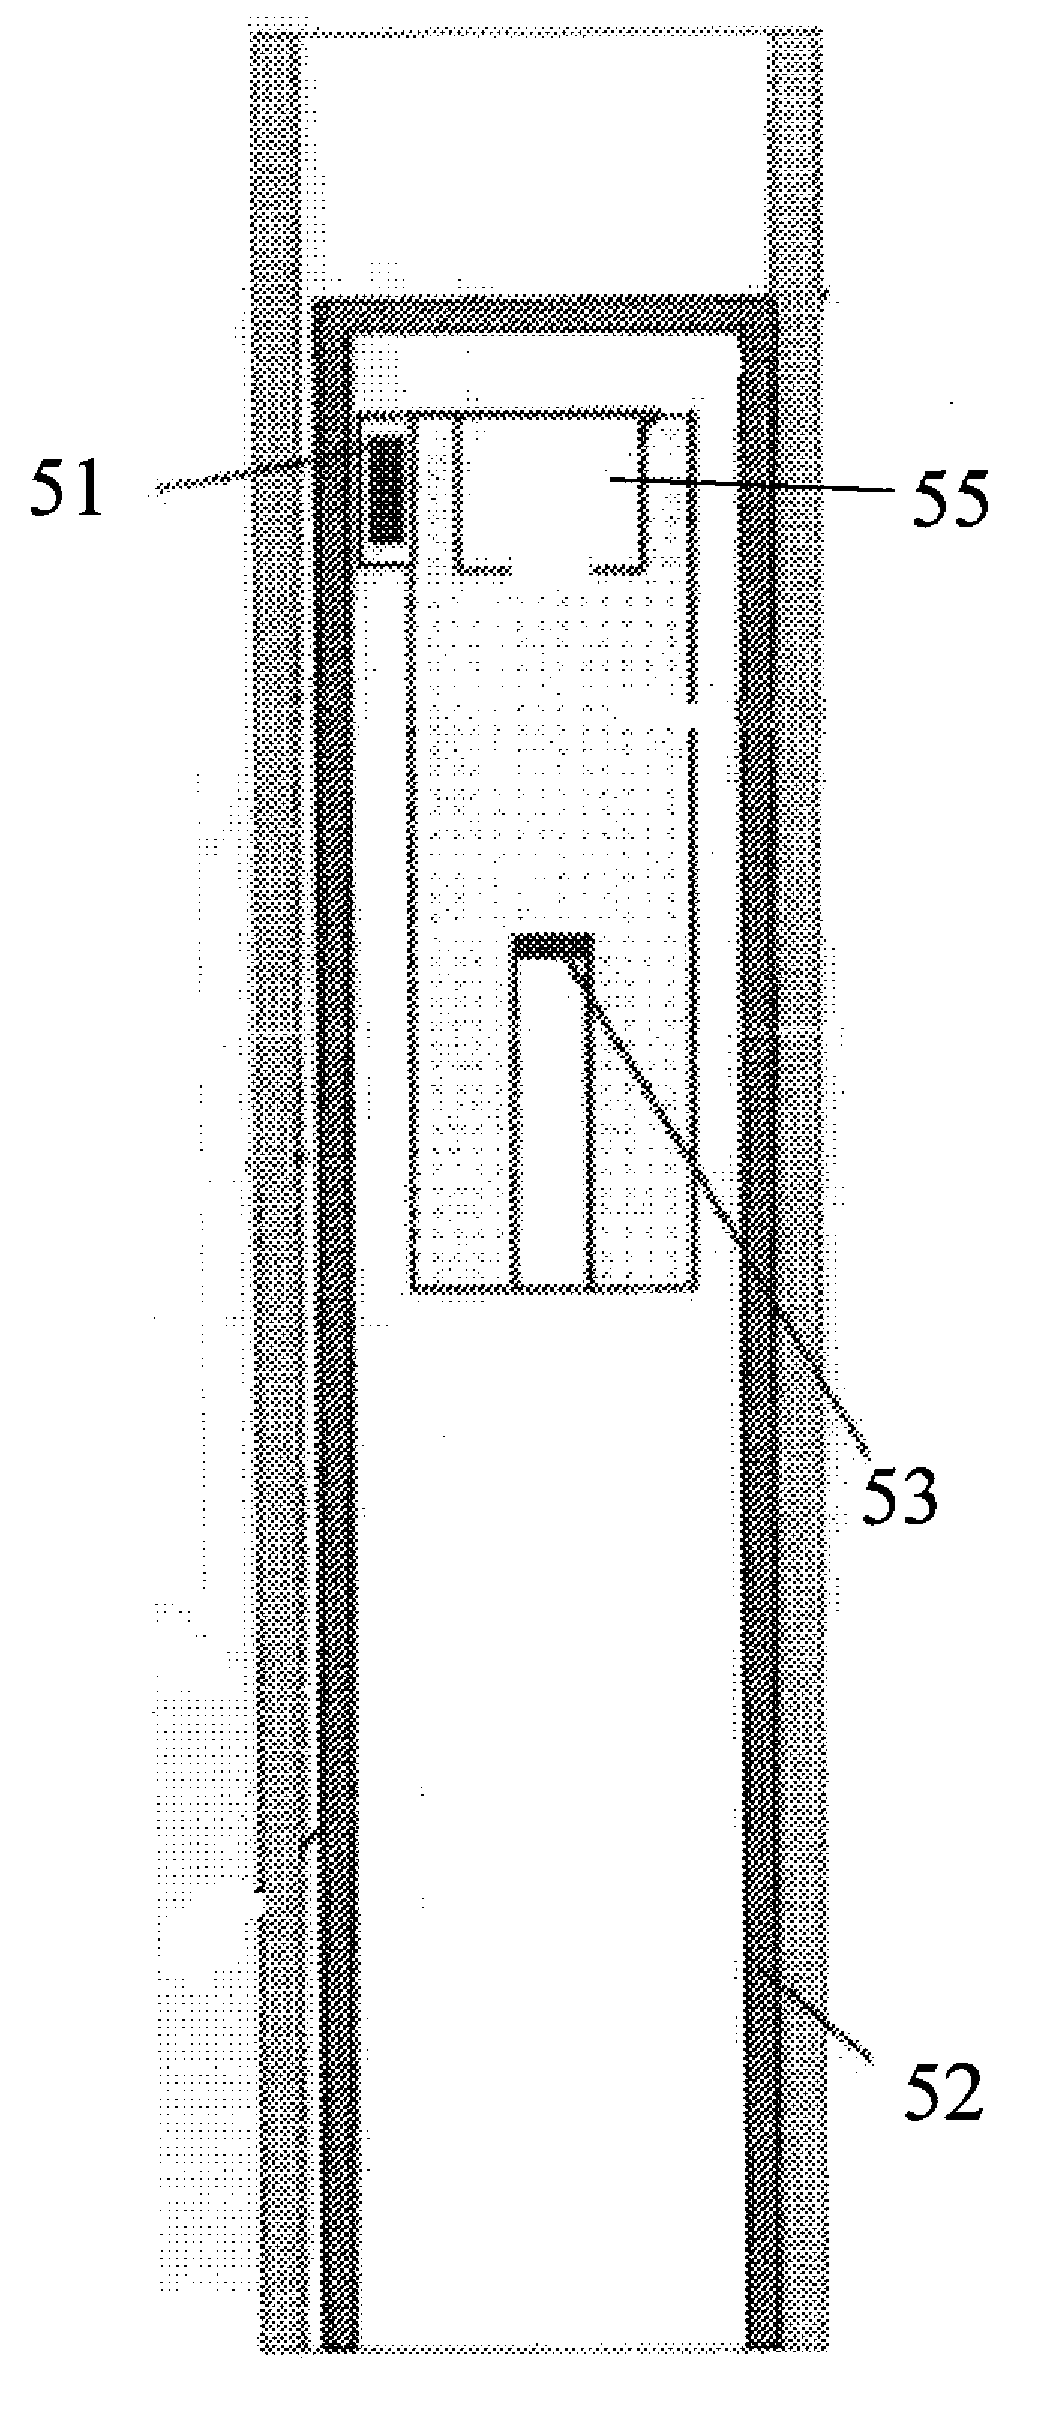 Downhole Tools with Solid-State Neutron Monitors